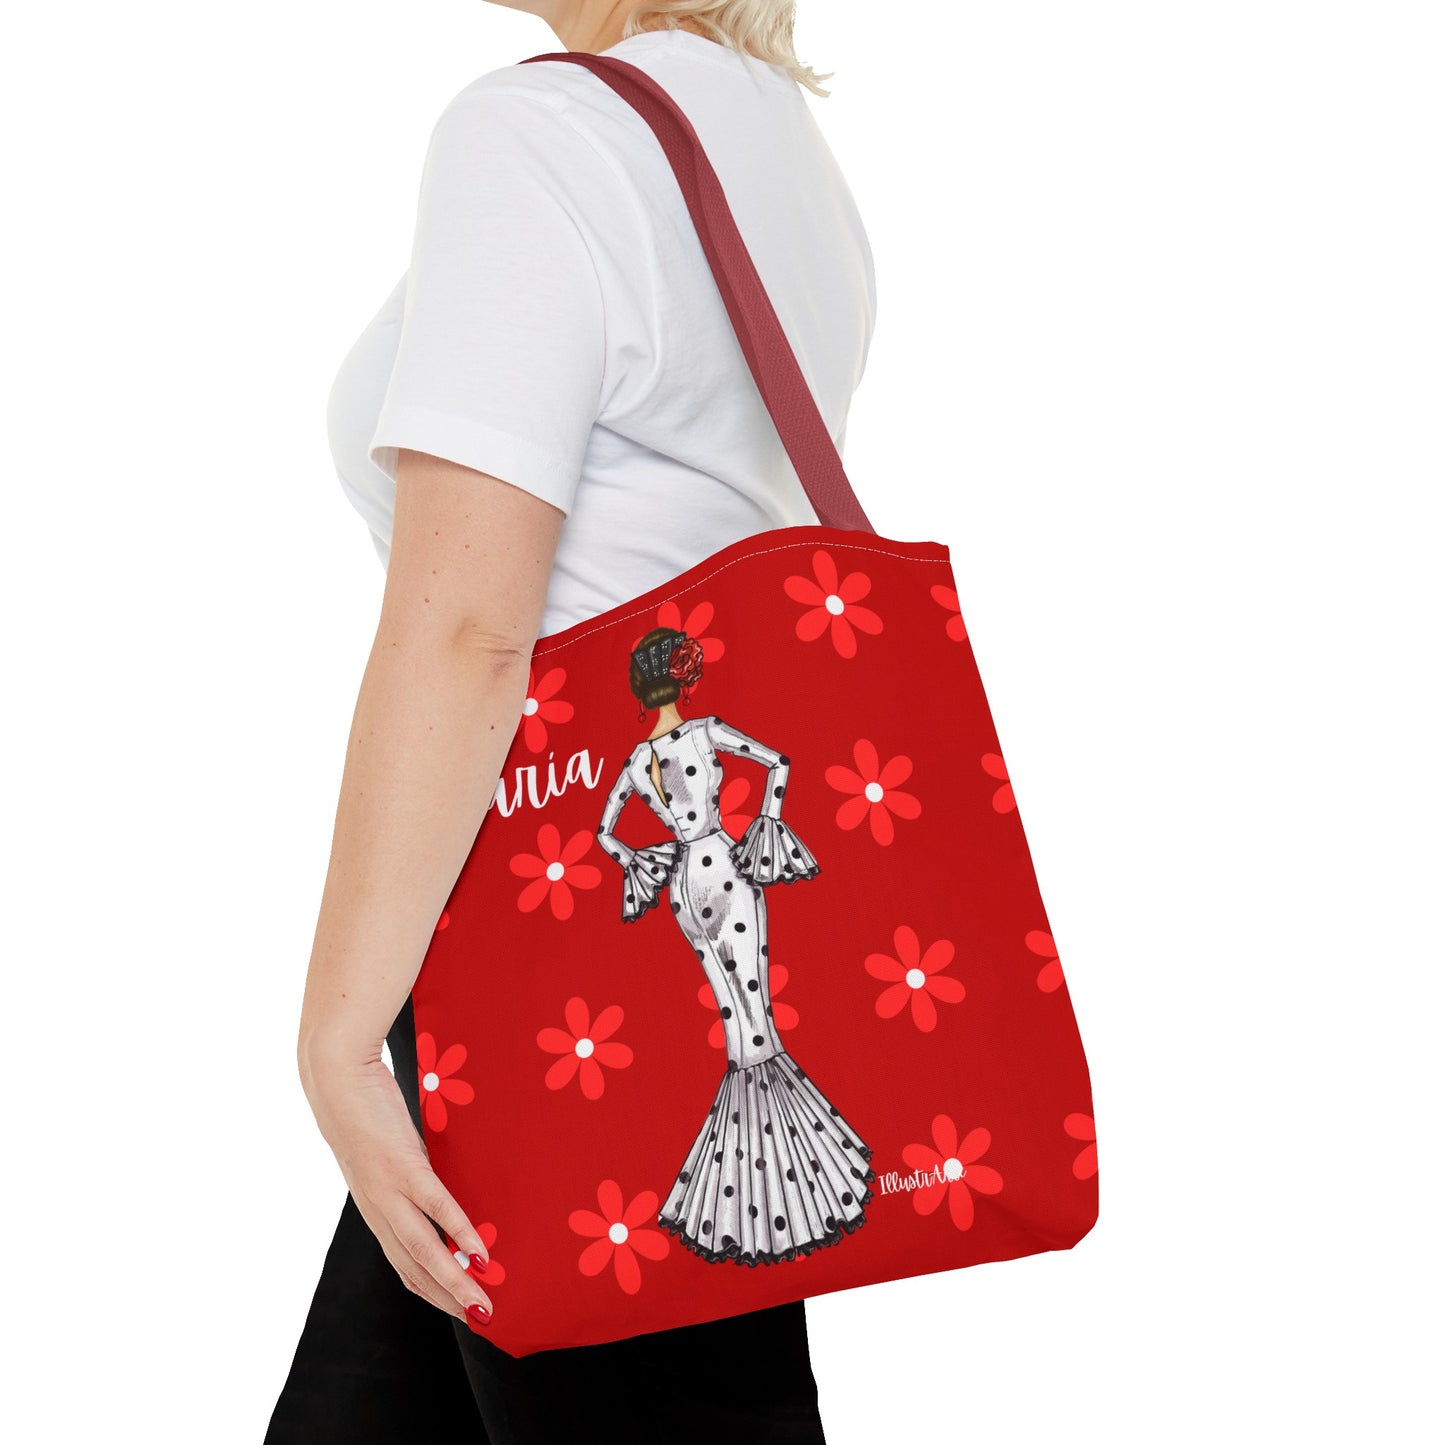 a woman carrying a red tote bag with a dalmatian design